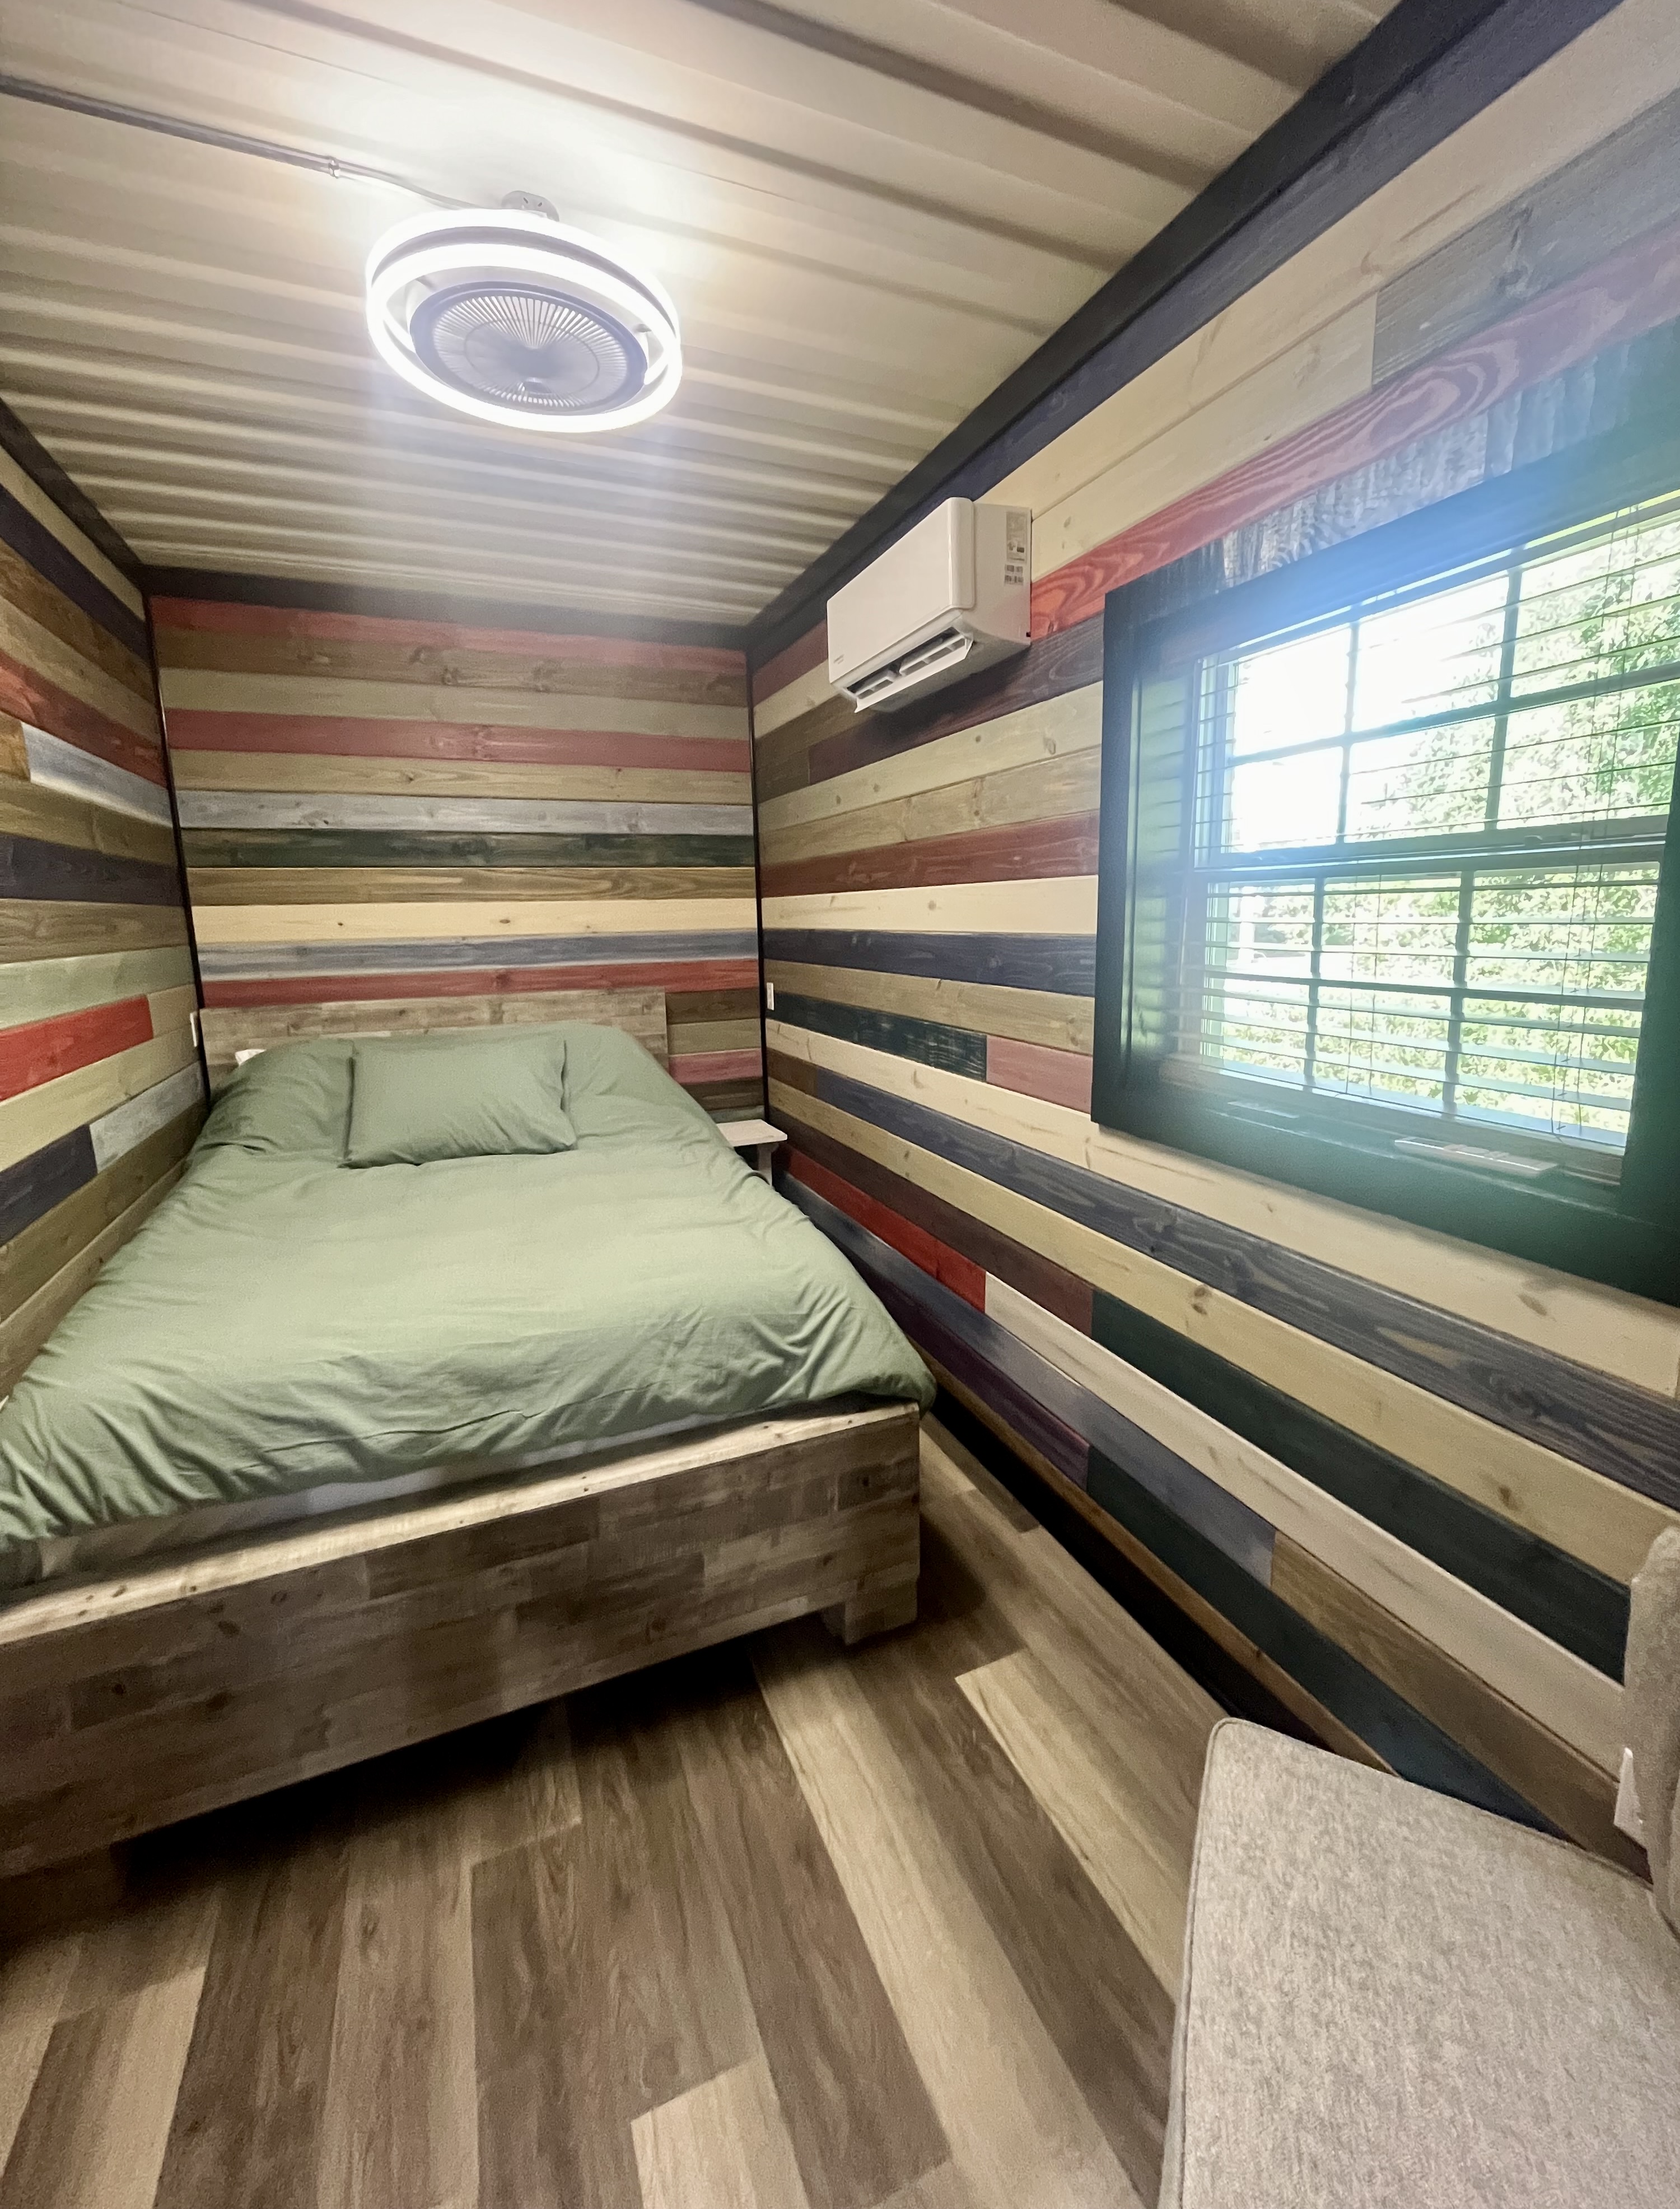 One of two bedrooms in the Airbnb constructed from empty shipping containers.